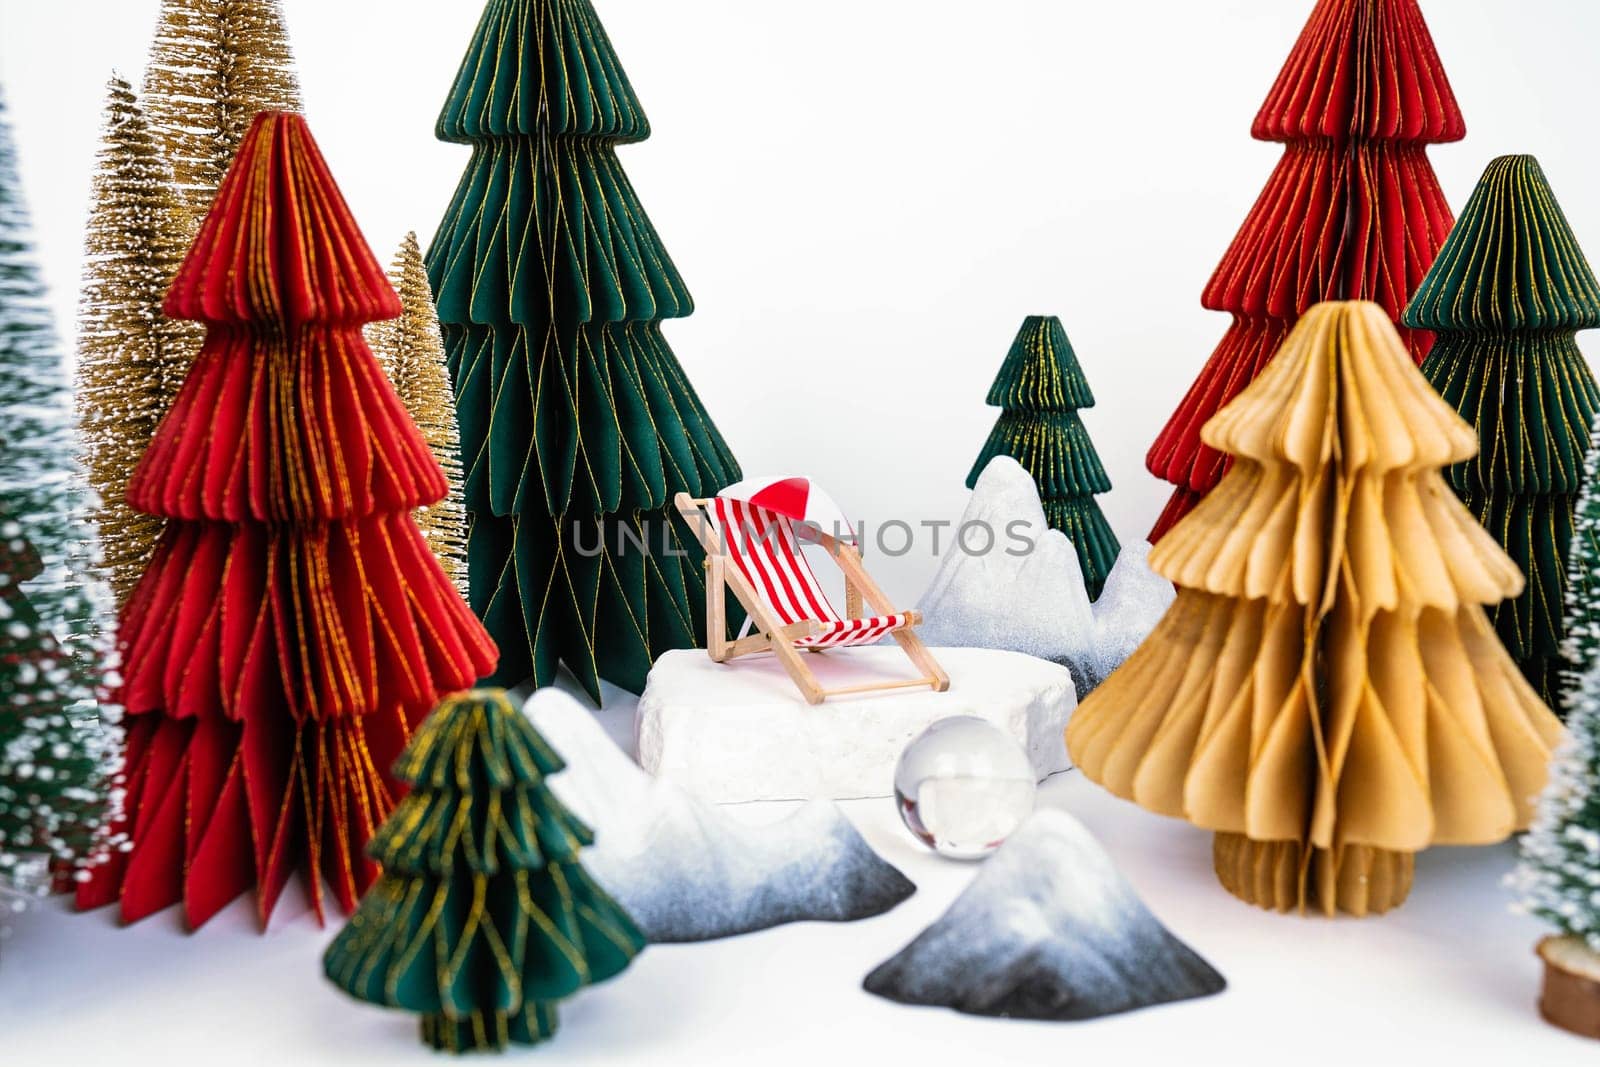 Christmas background with colorful Christmas trees. New Year's Greeting Card. High quality photo